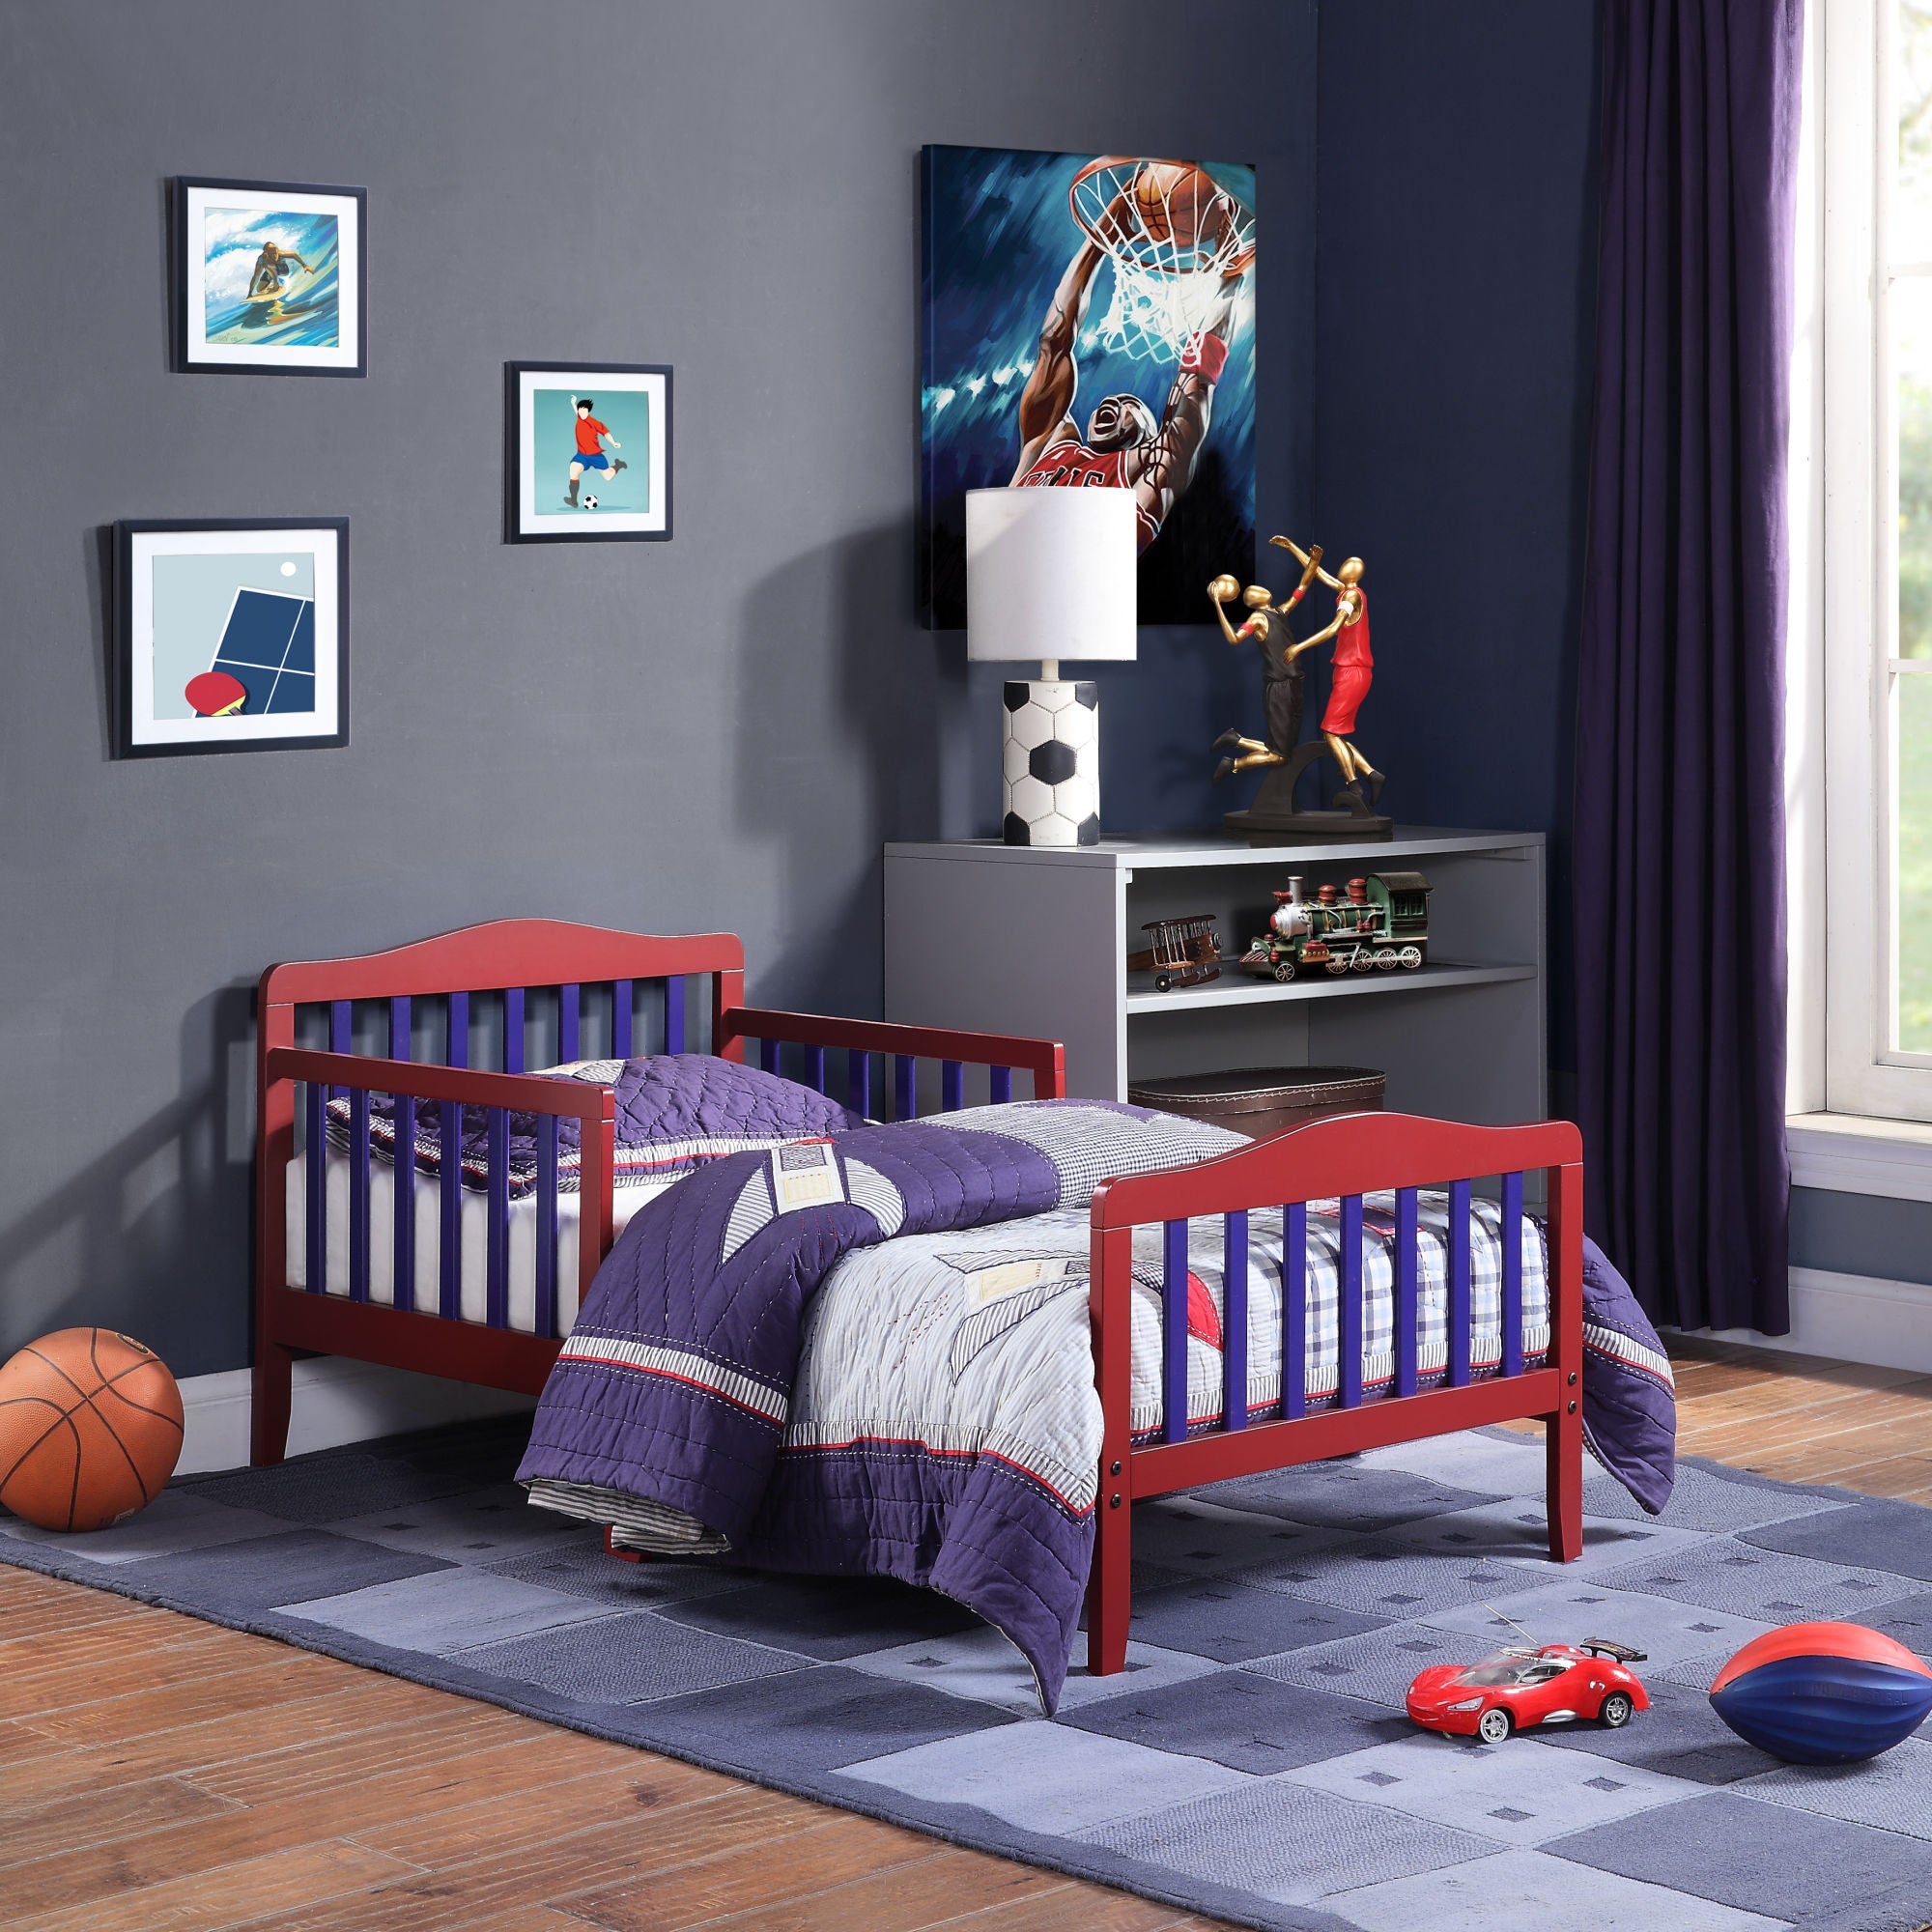 Twain Toddler Bed Red/Blue